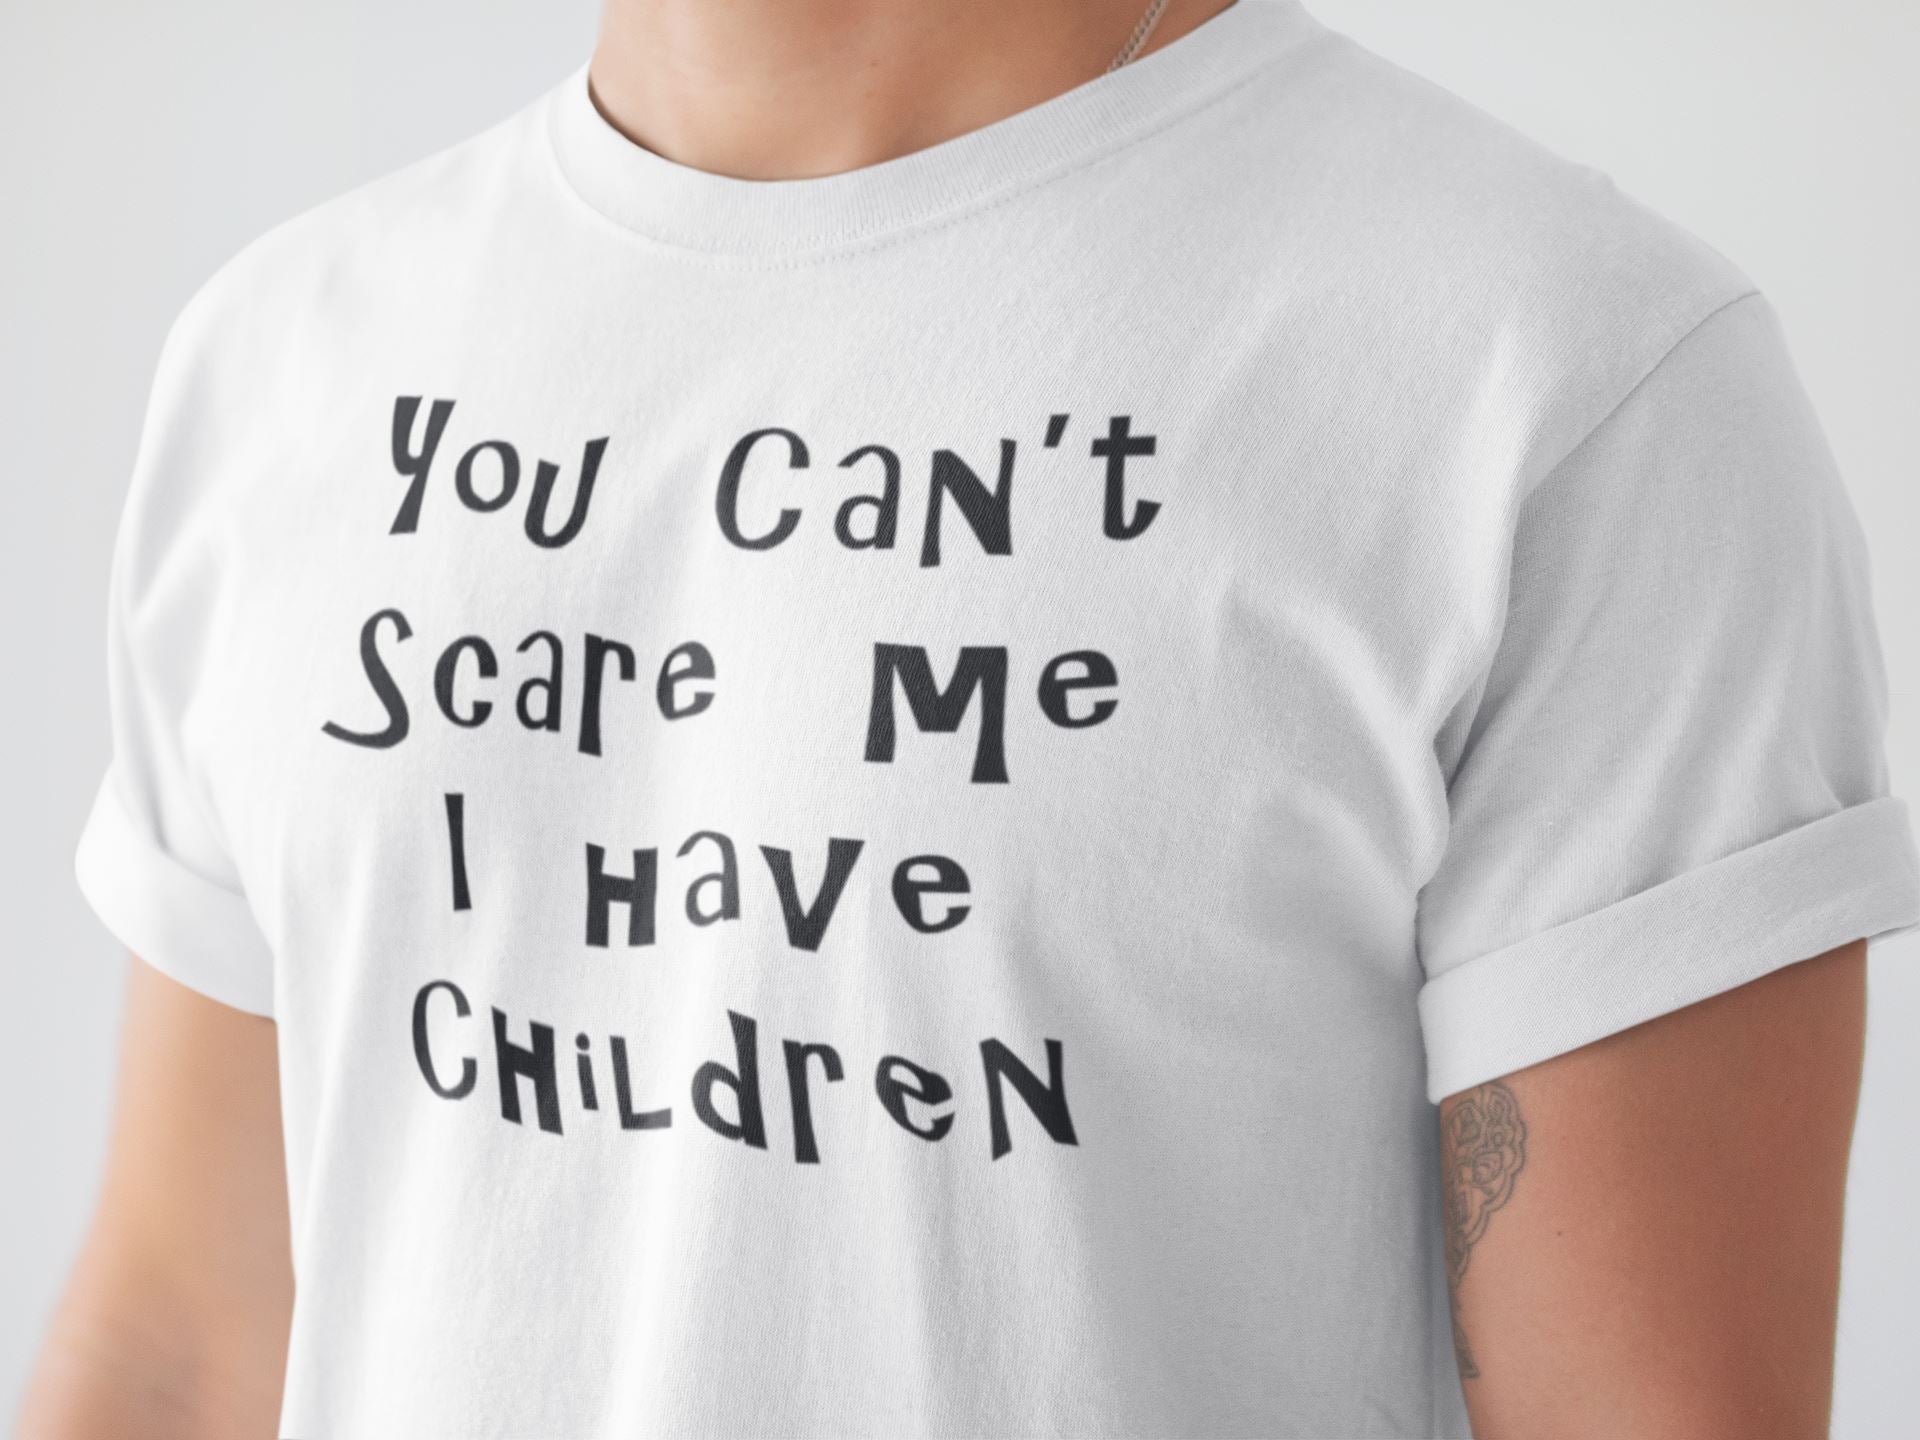 You Can't Scare Me I Have Children Funny White T Shirt for Mothers and Fathers freeshipping - Catch My Drift India